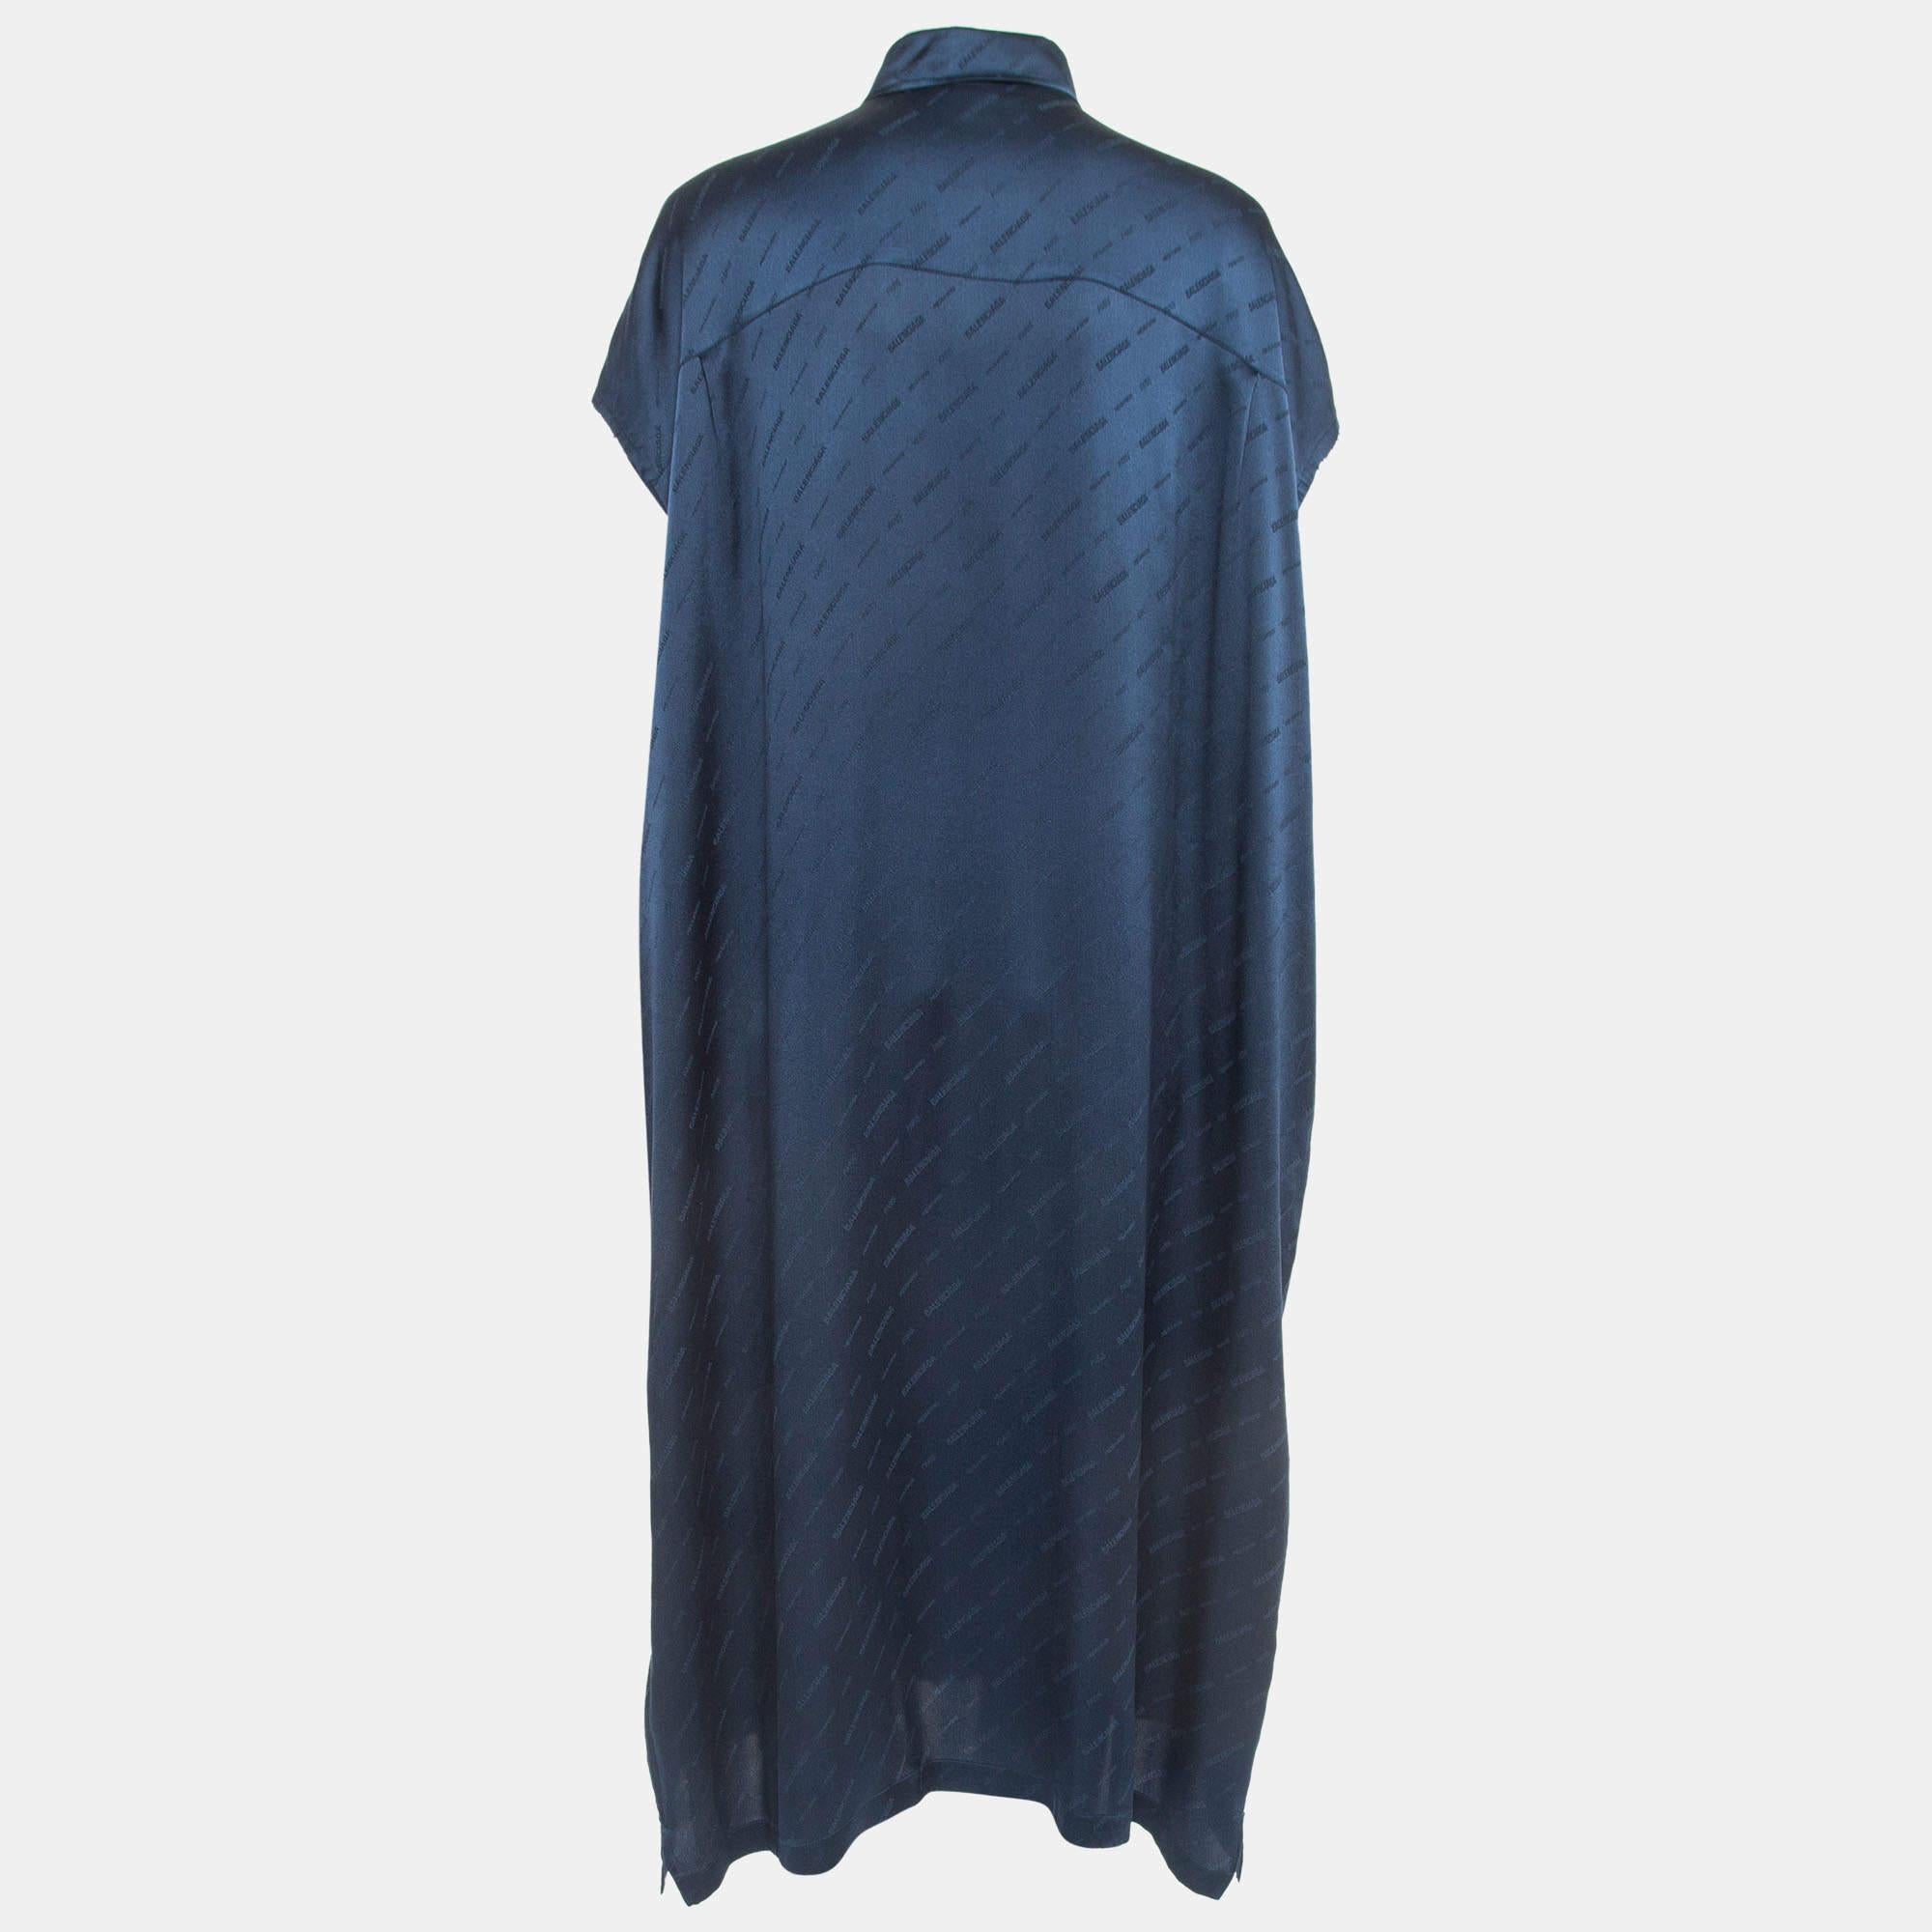 Exhibit a stylish look by wearing this beautiful designer Balenciaga dress. Tailored using fine fabric, this dress has a chic silhouette for a framing fit. Style the creation with chic accessories and pumps. It is an oversized shirt dress with raw